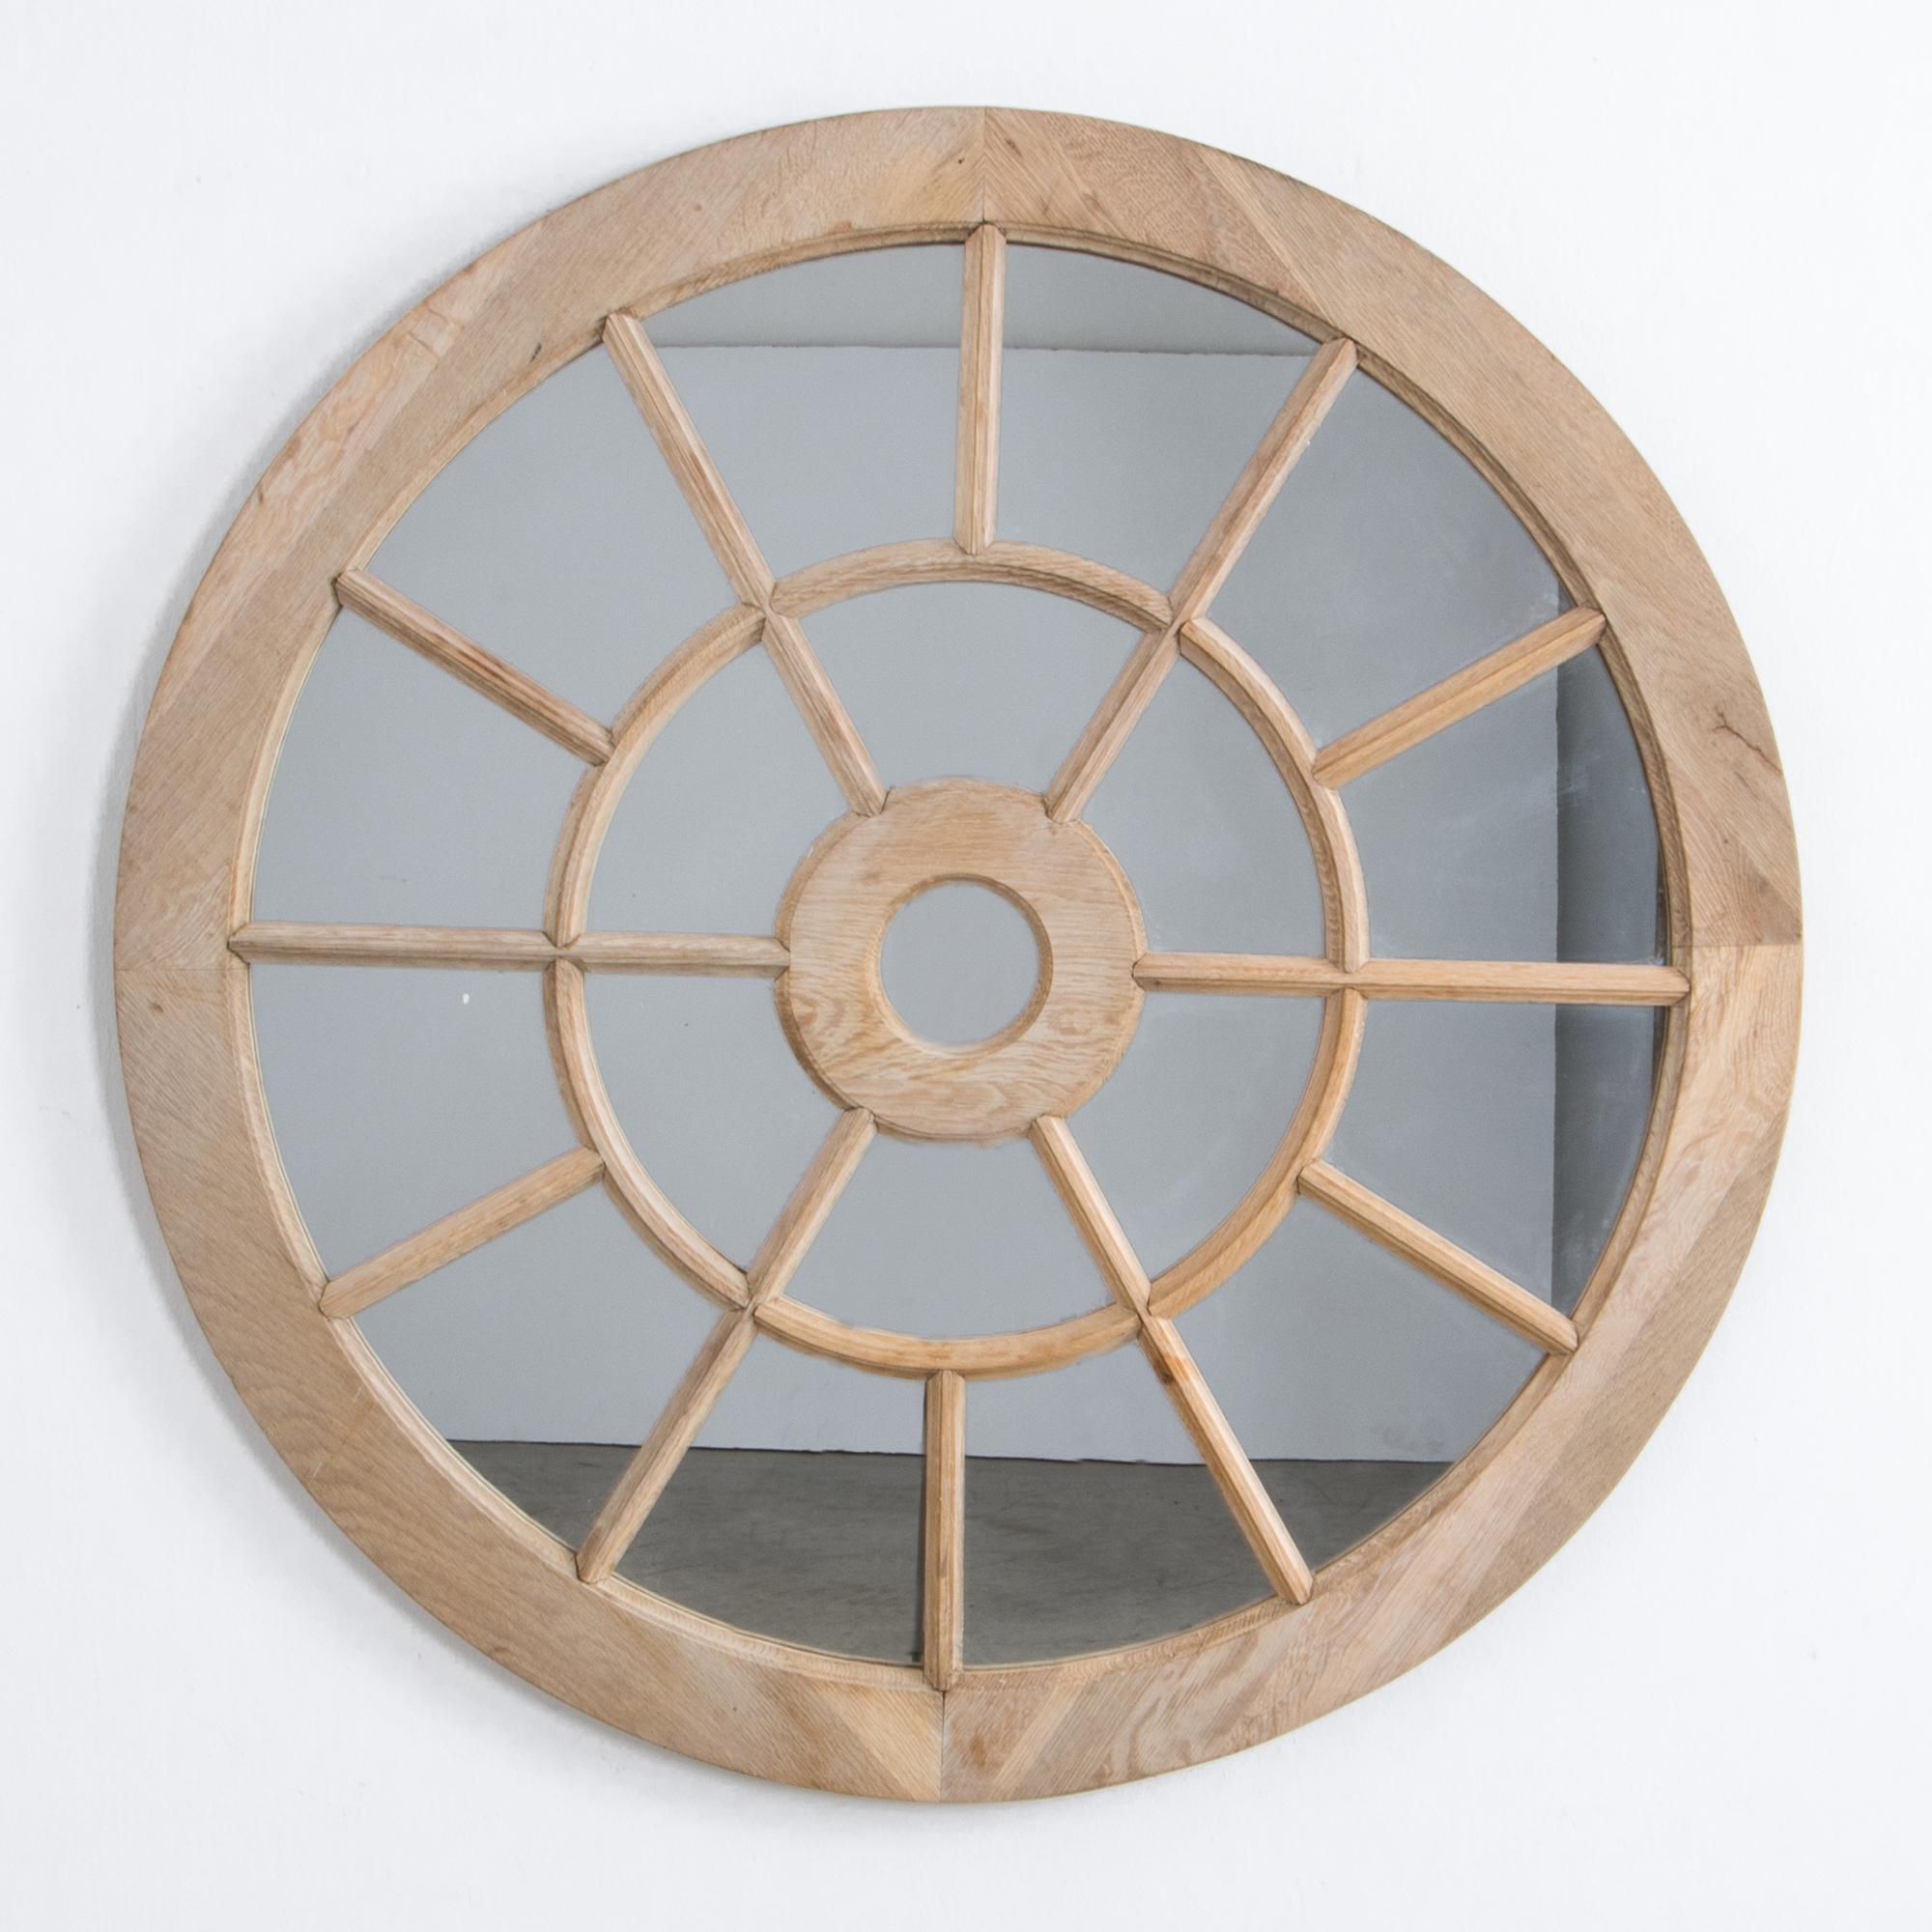 A prototype from our atelier, this wooden mirror was created as a modern interpretation of traditional architectural forms. In prototypical oak, concentric circles make a bull’s-eye frame for muntin pieces, the typical dividers for window frames.